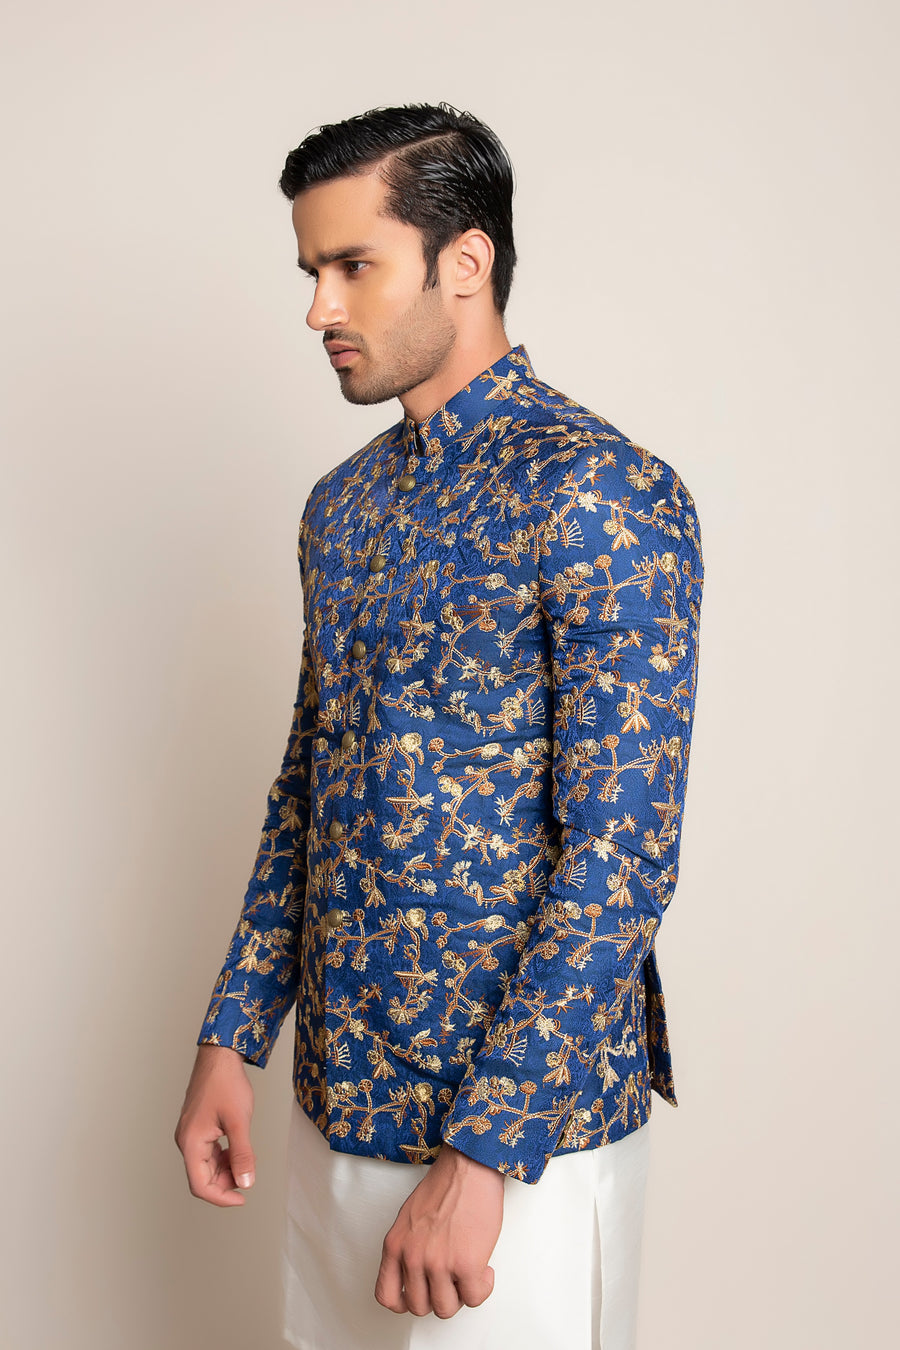 BLUE EMBROIDERED PRINCE COAT